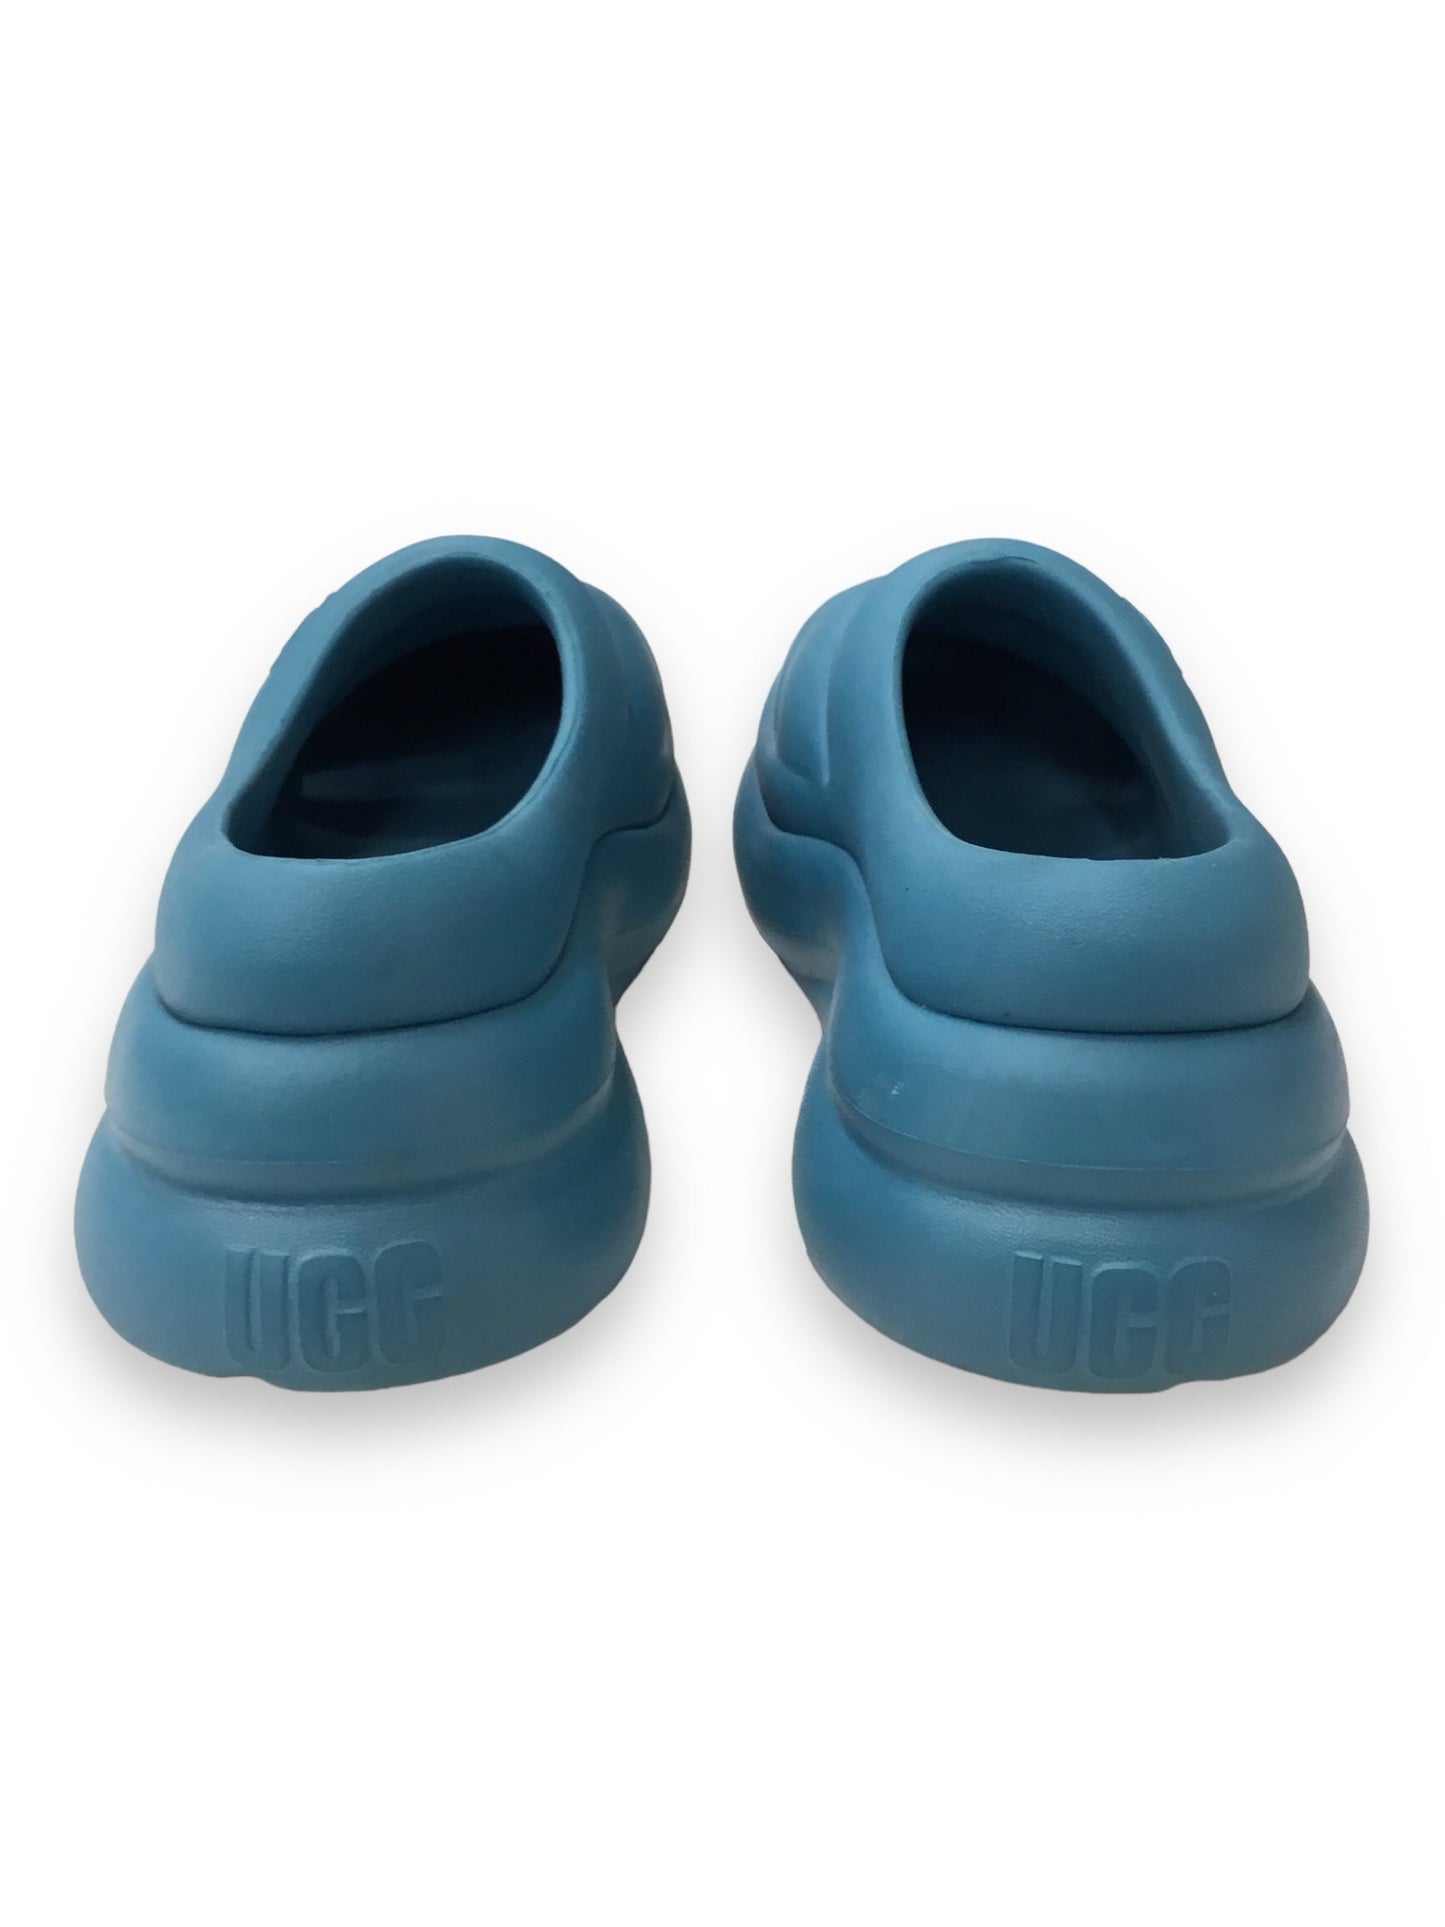 Blue Slippers Ugg, Size 8